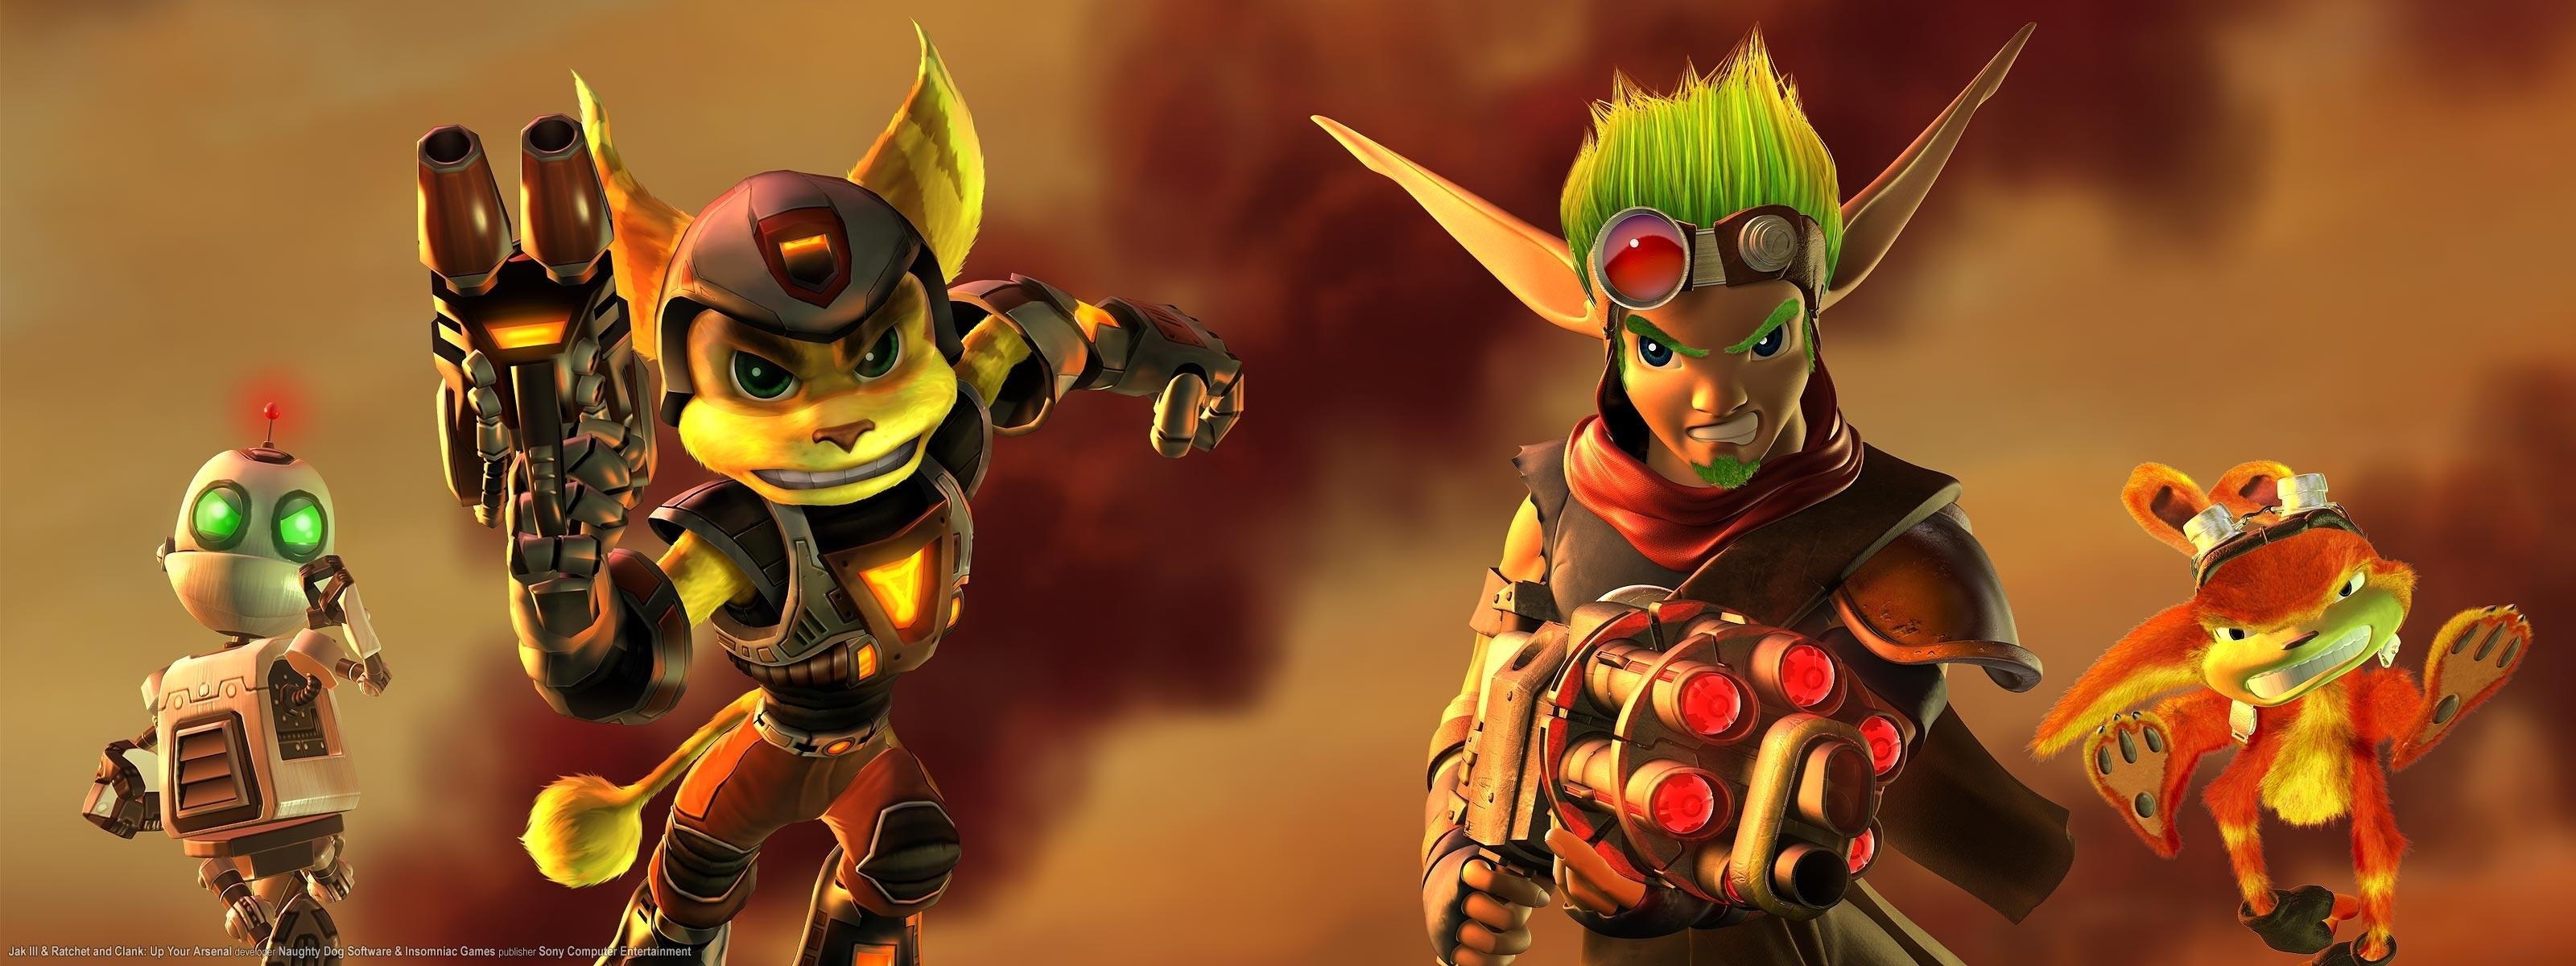 3200x1200 ratchet and clank insomnia naughty dog jak daxter wallpaper background  